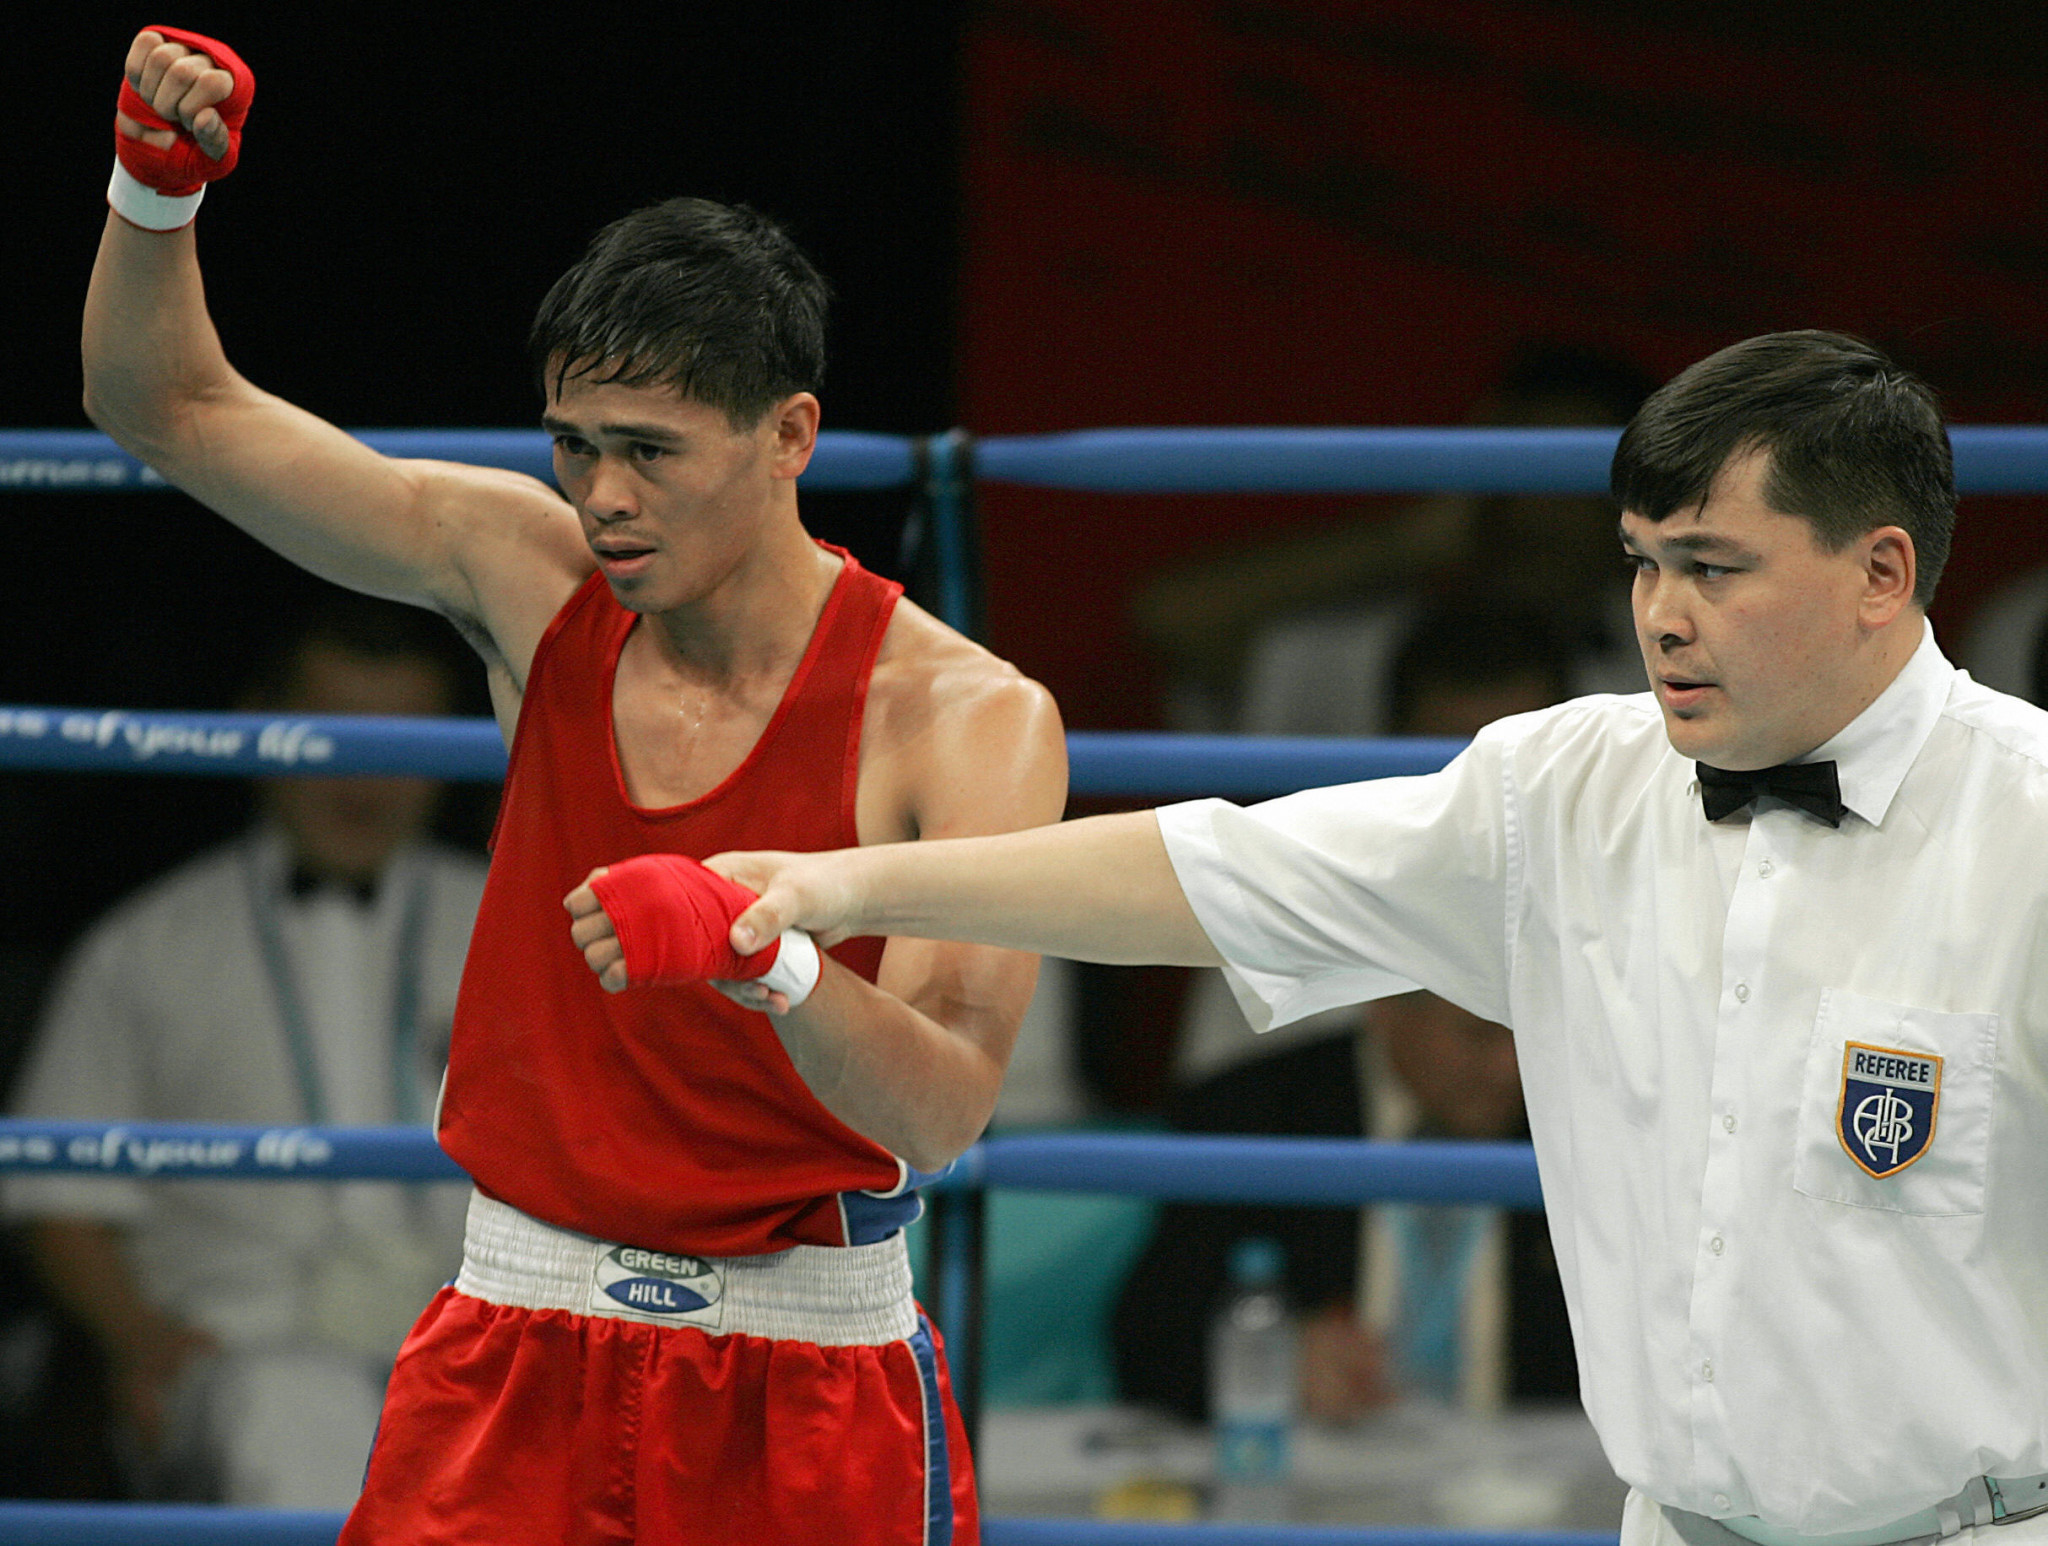 Genebert Basadre, left, won at bronze medal at the 2006 Asian Games ©Getty Images